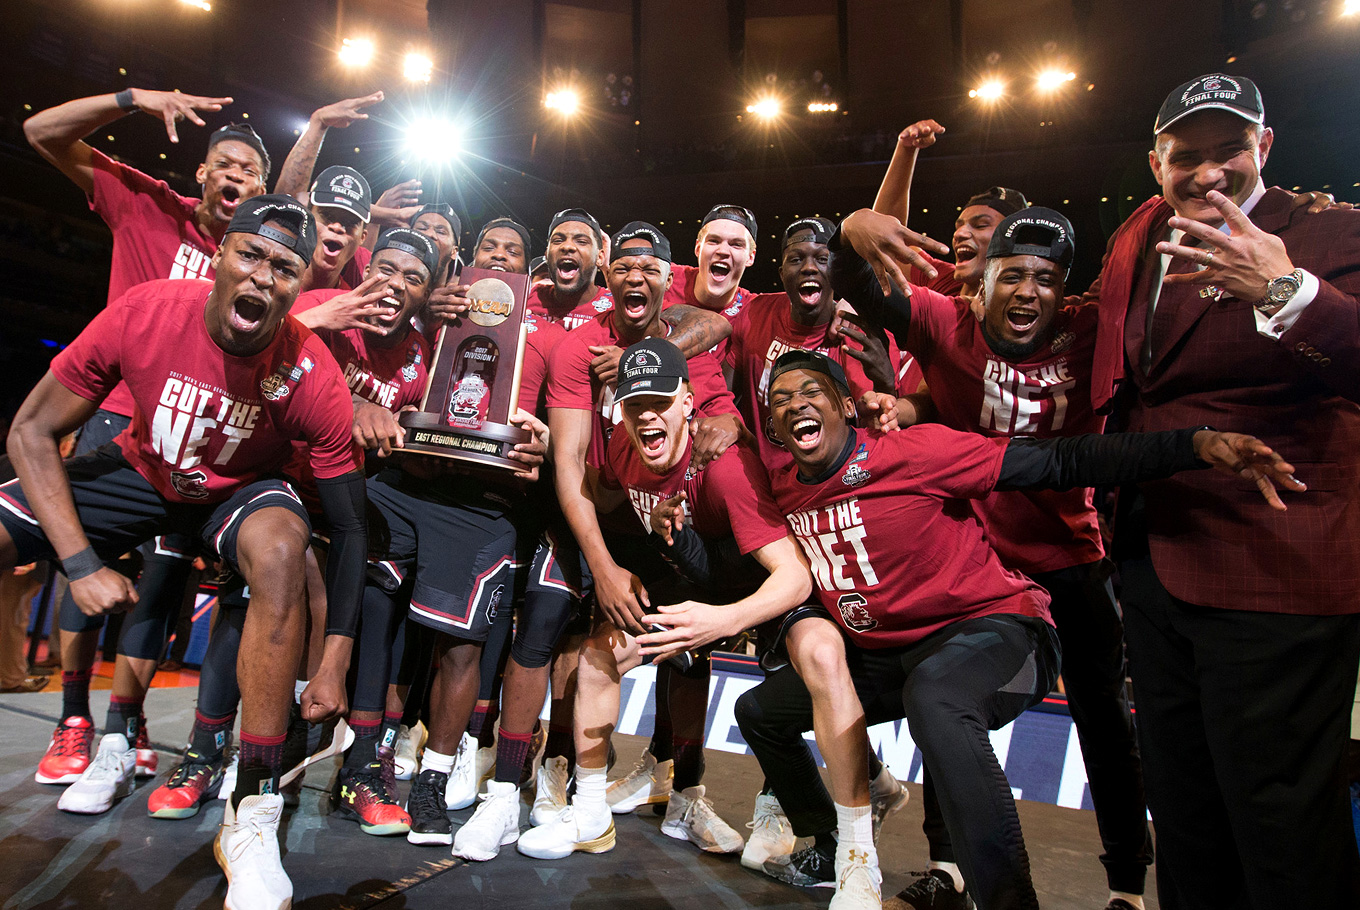 South Carolina Men's Basketball team celebrating being in the Final Four